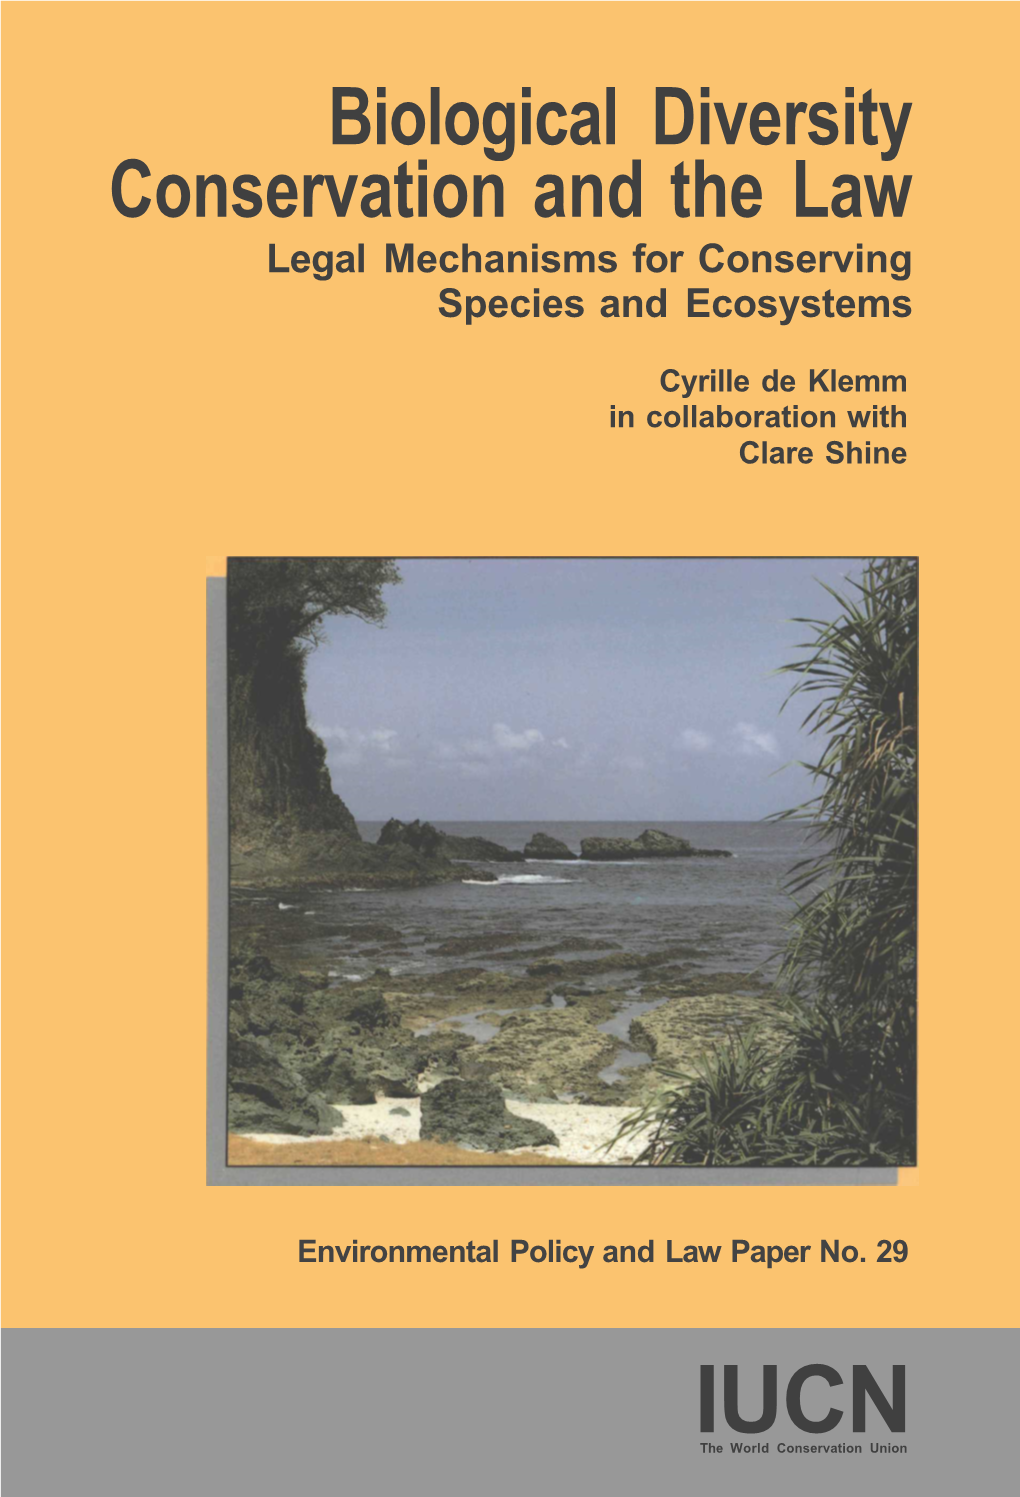 Biological Diversity Conservation and the Law Legal Mechanisms for Conserving Species and Ecosystems